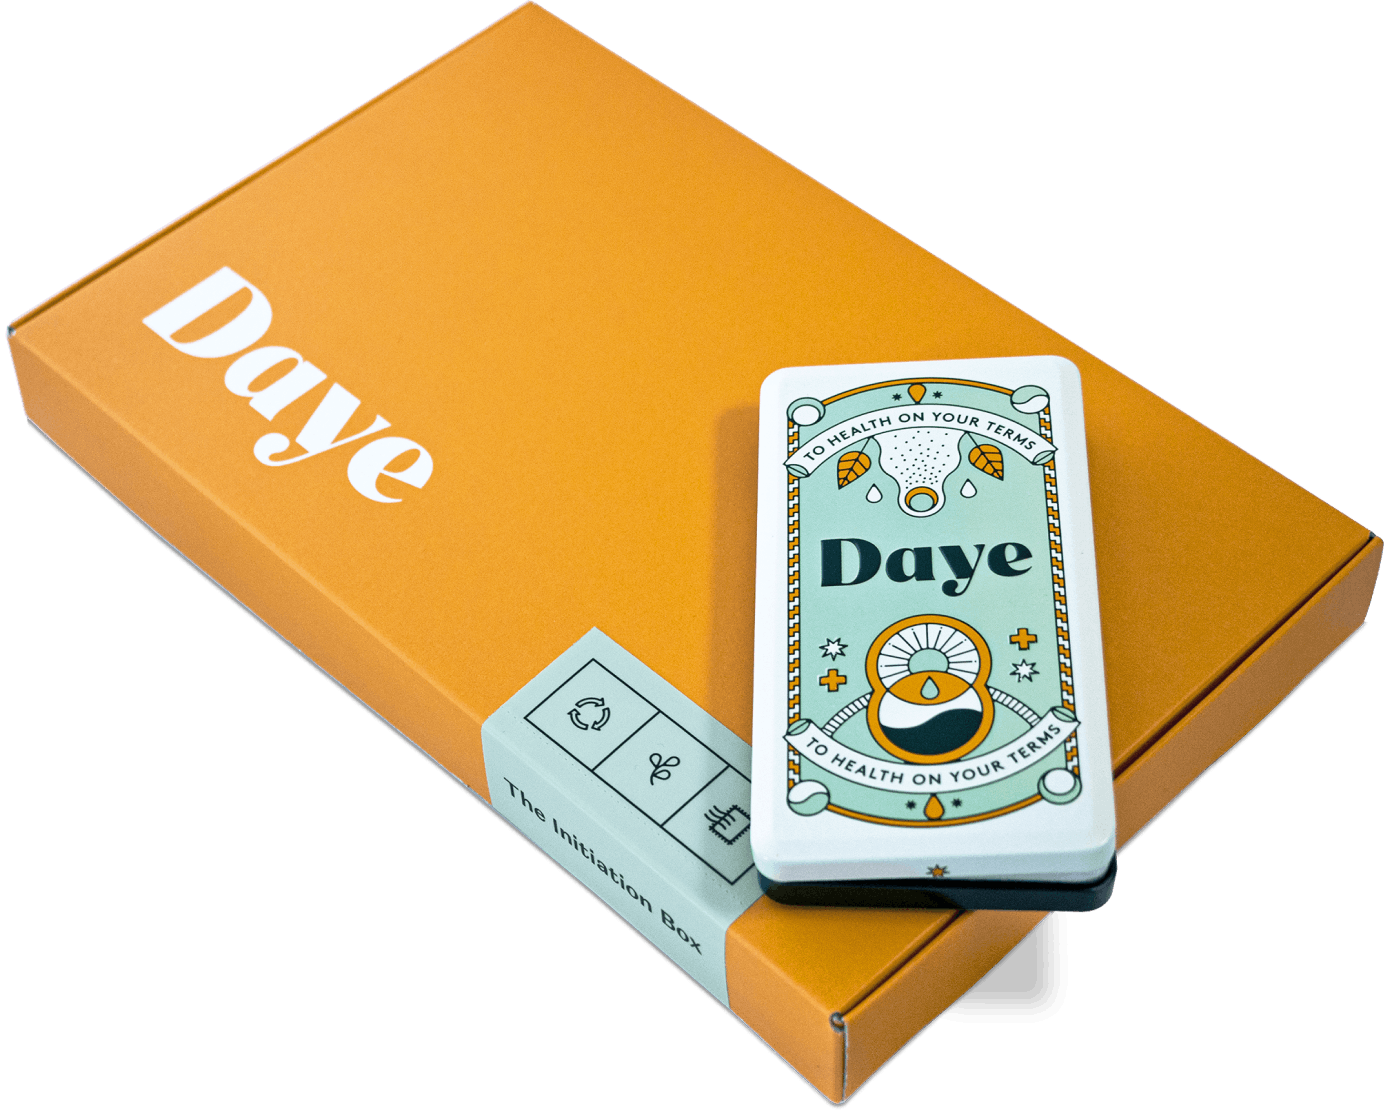 An orange cardboard box with pain-relieving sustainable Daye tampons and an endlessly recyclable aluminium tin with organic Daye tampons 